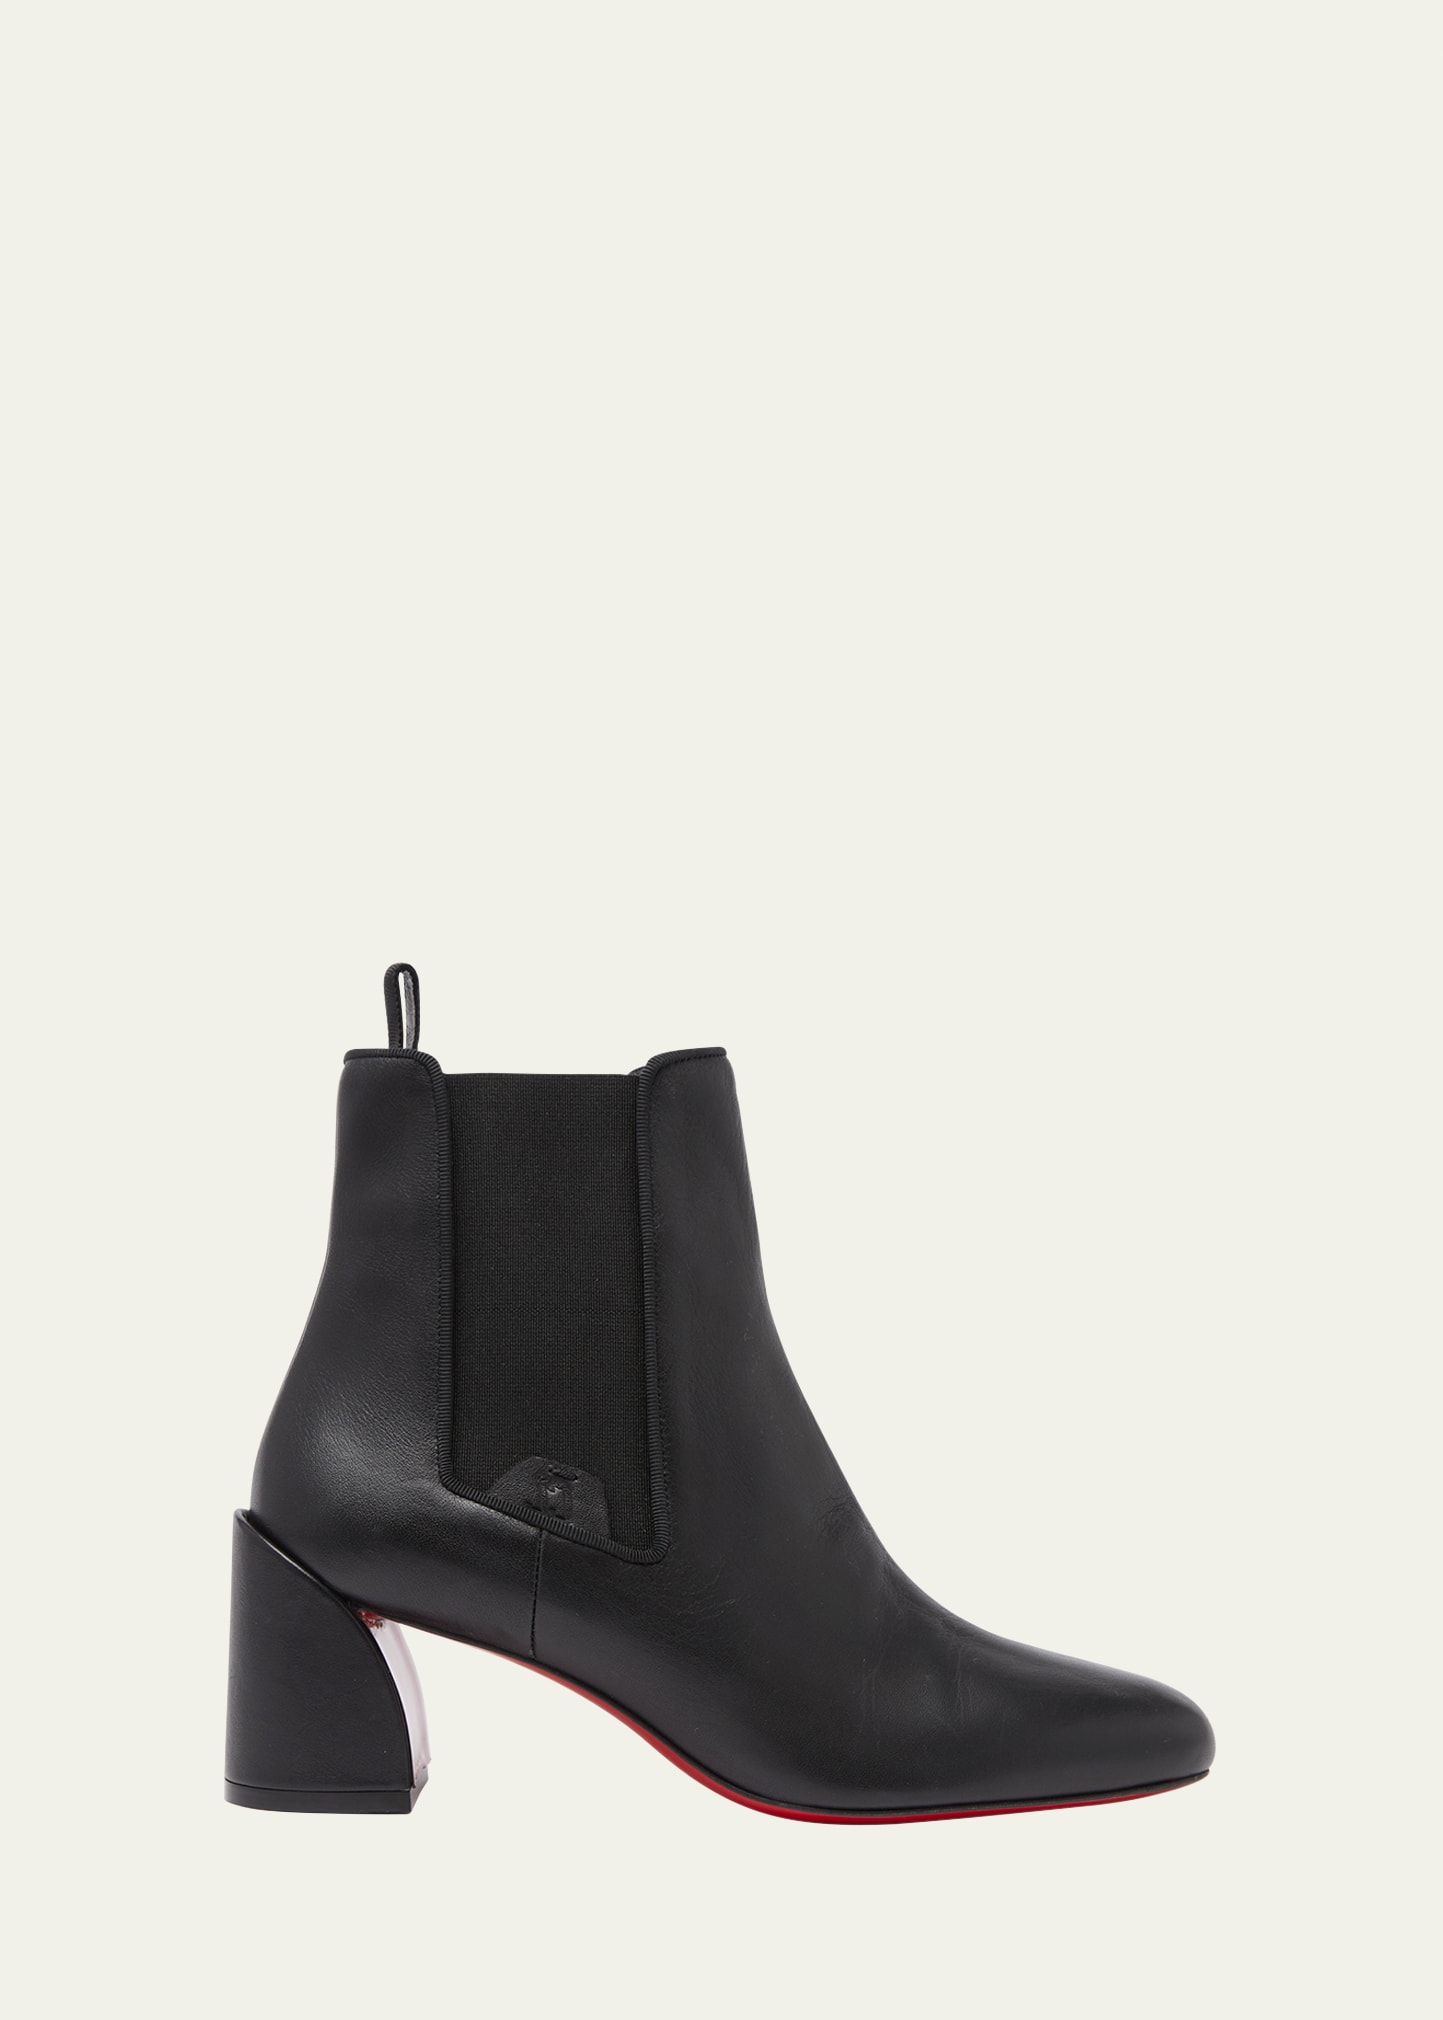 Turelastic Red Sole Calf Leather Boots